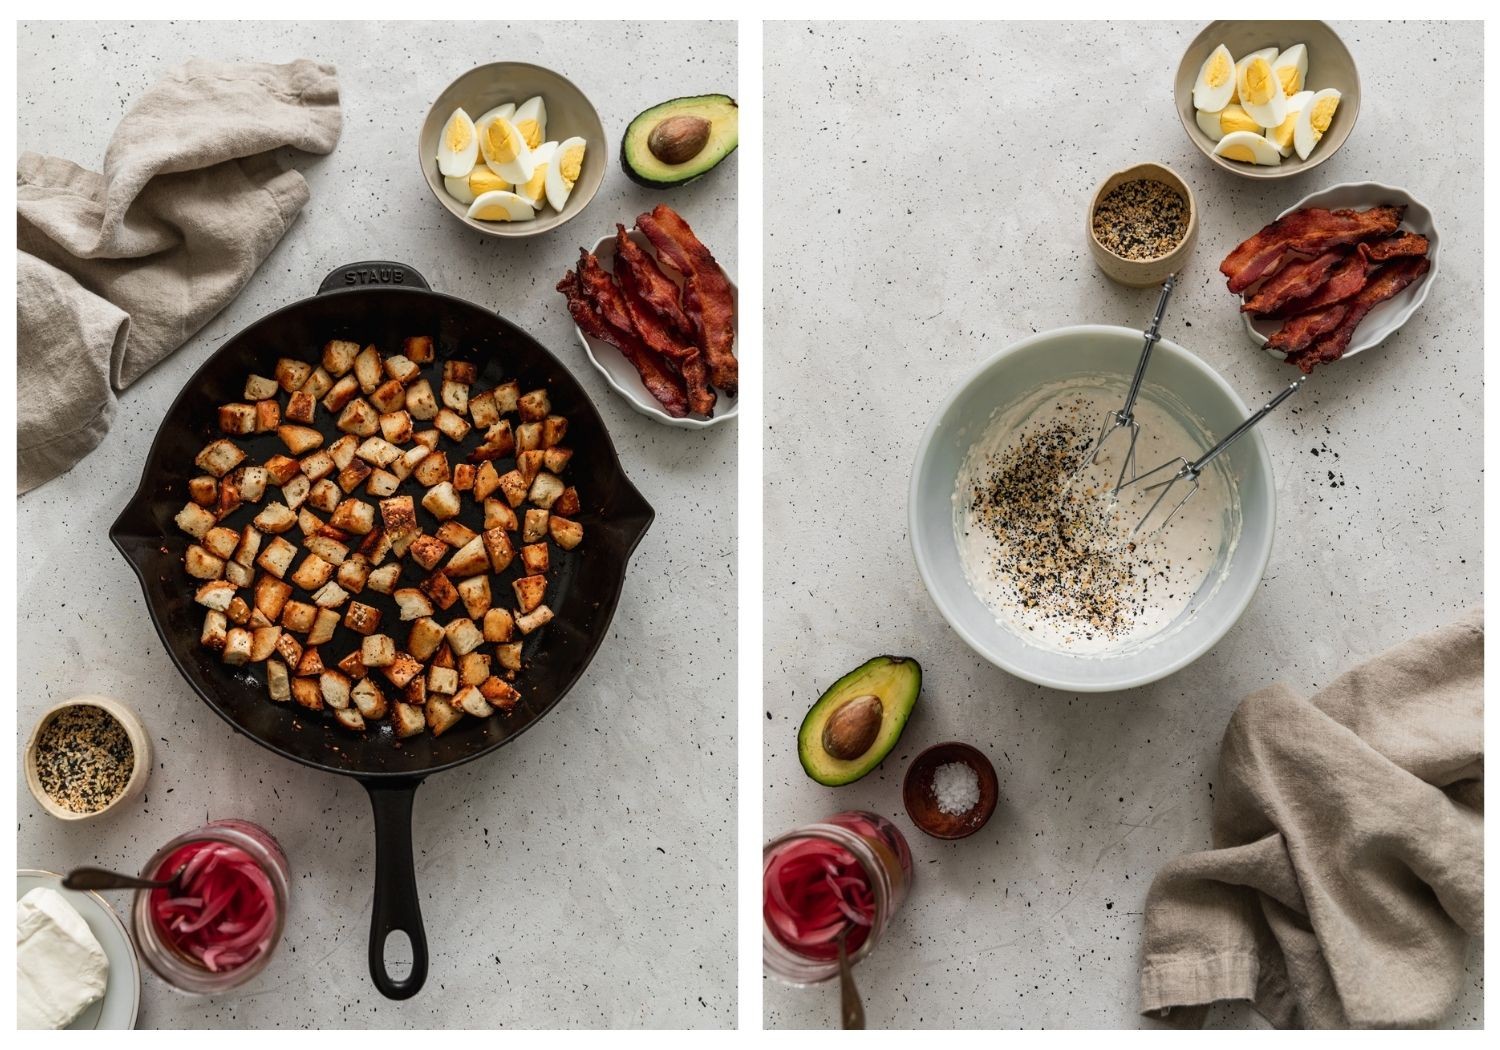 Two overhead photos; on the left, a black Staub pan with croutons surrounded by salad ingredients on a speckled table. On the right, a bowl of dressing surrounded by salad ingredients.